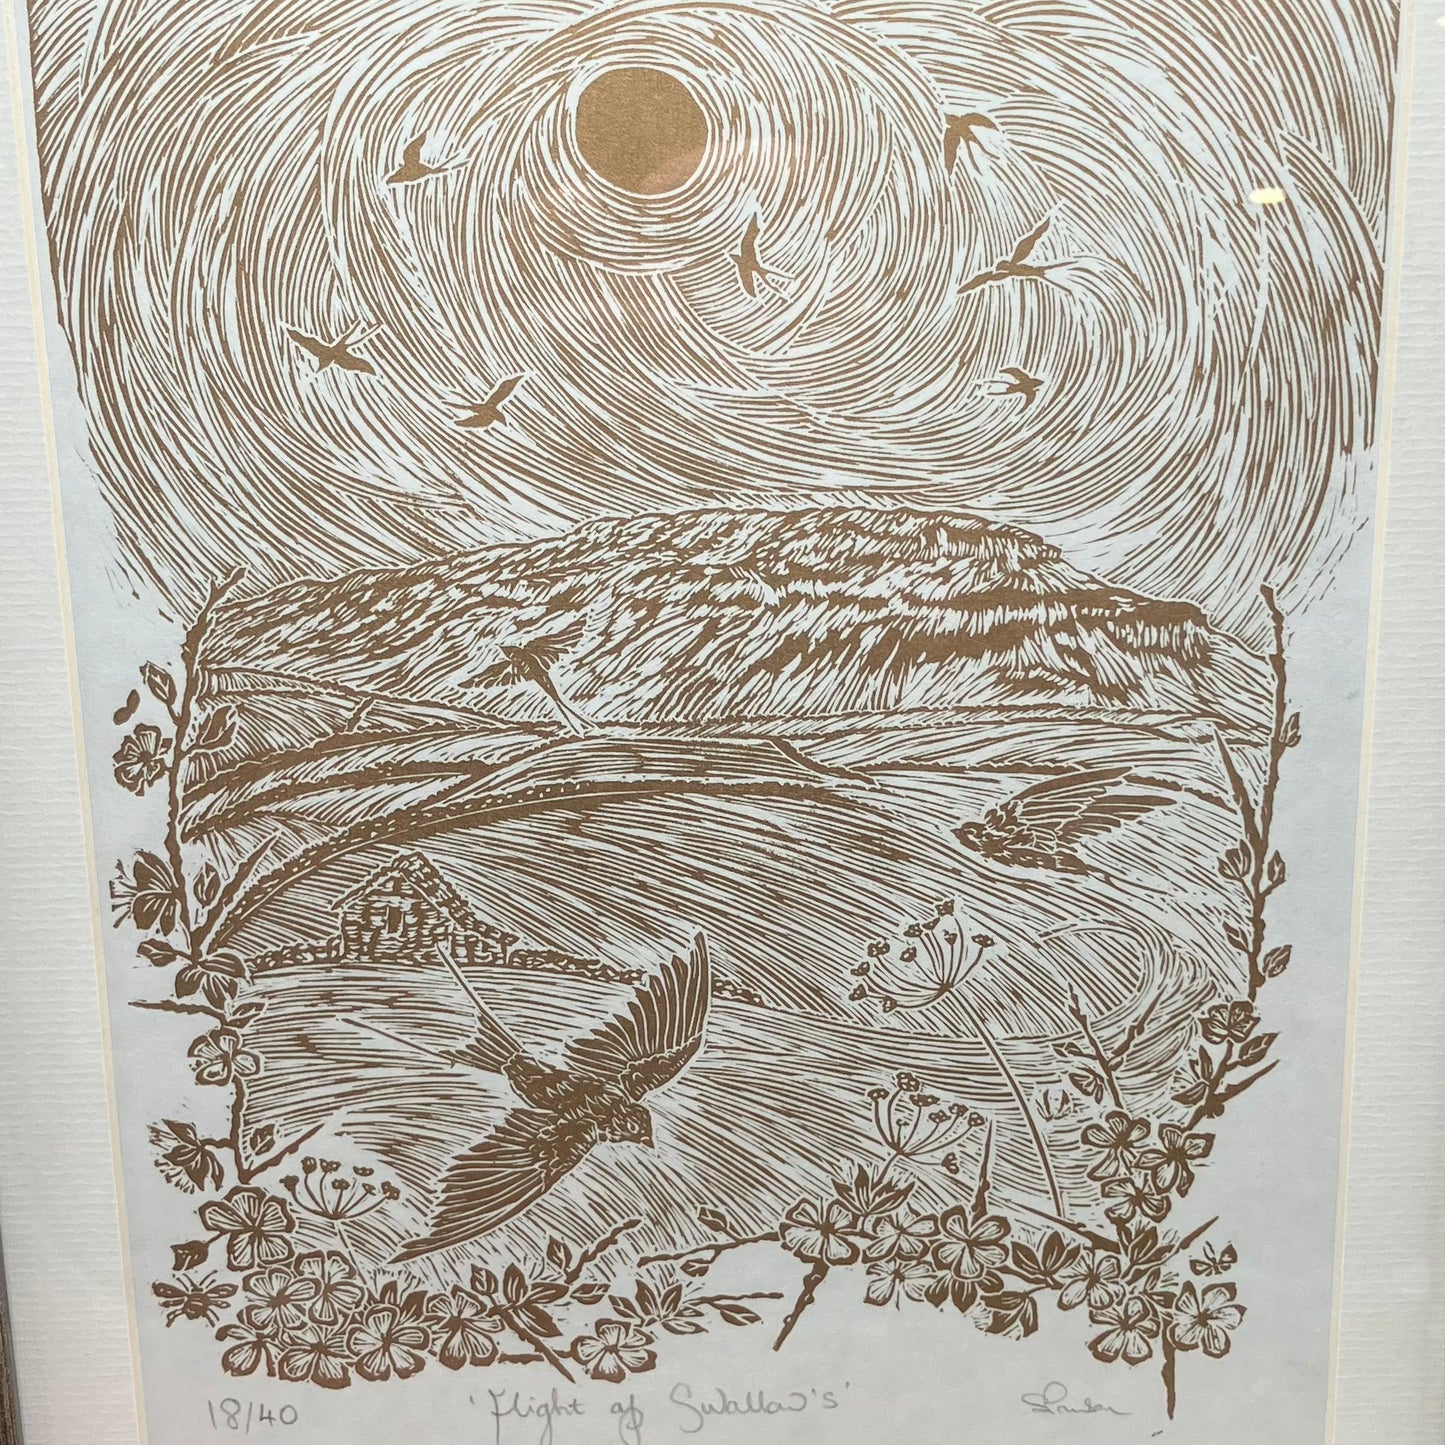 Flight of Swallows | Limited Edition Framed Lino prints | 2 Designs